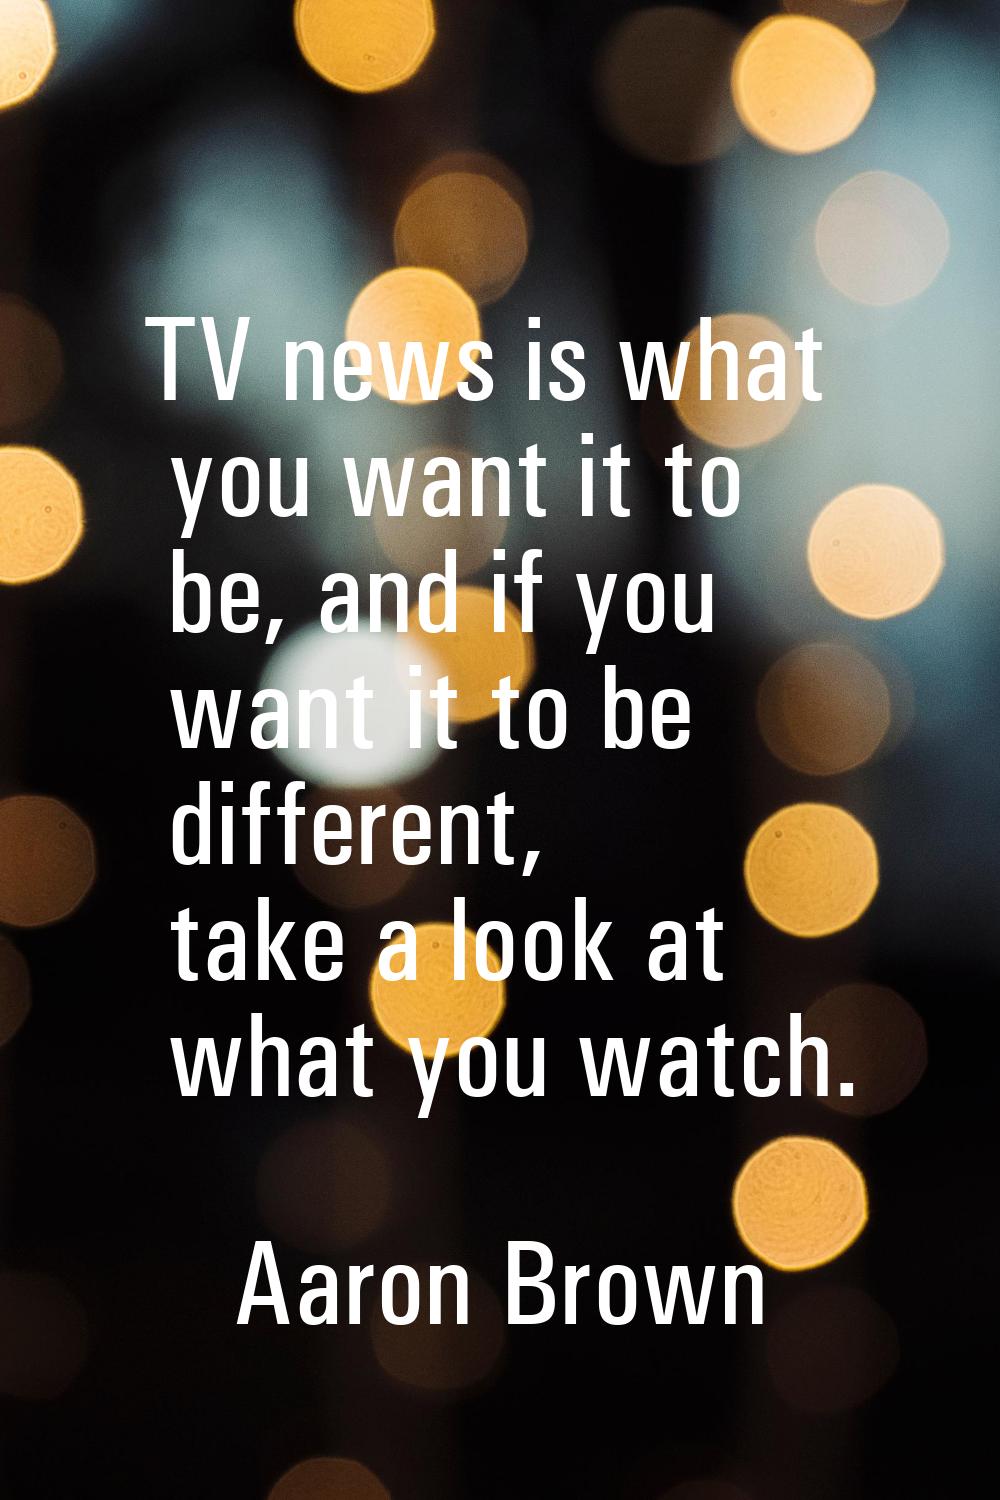 TV news is what you want it to be, and if you want it to be different, take a look at what you watc